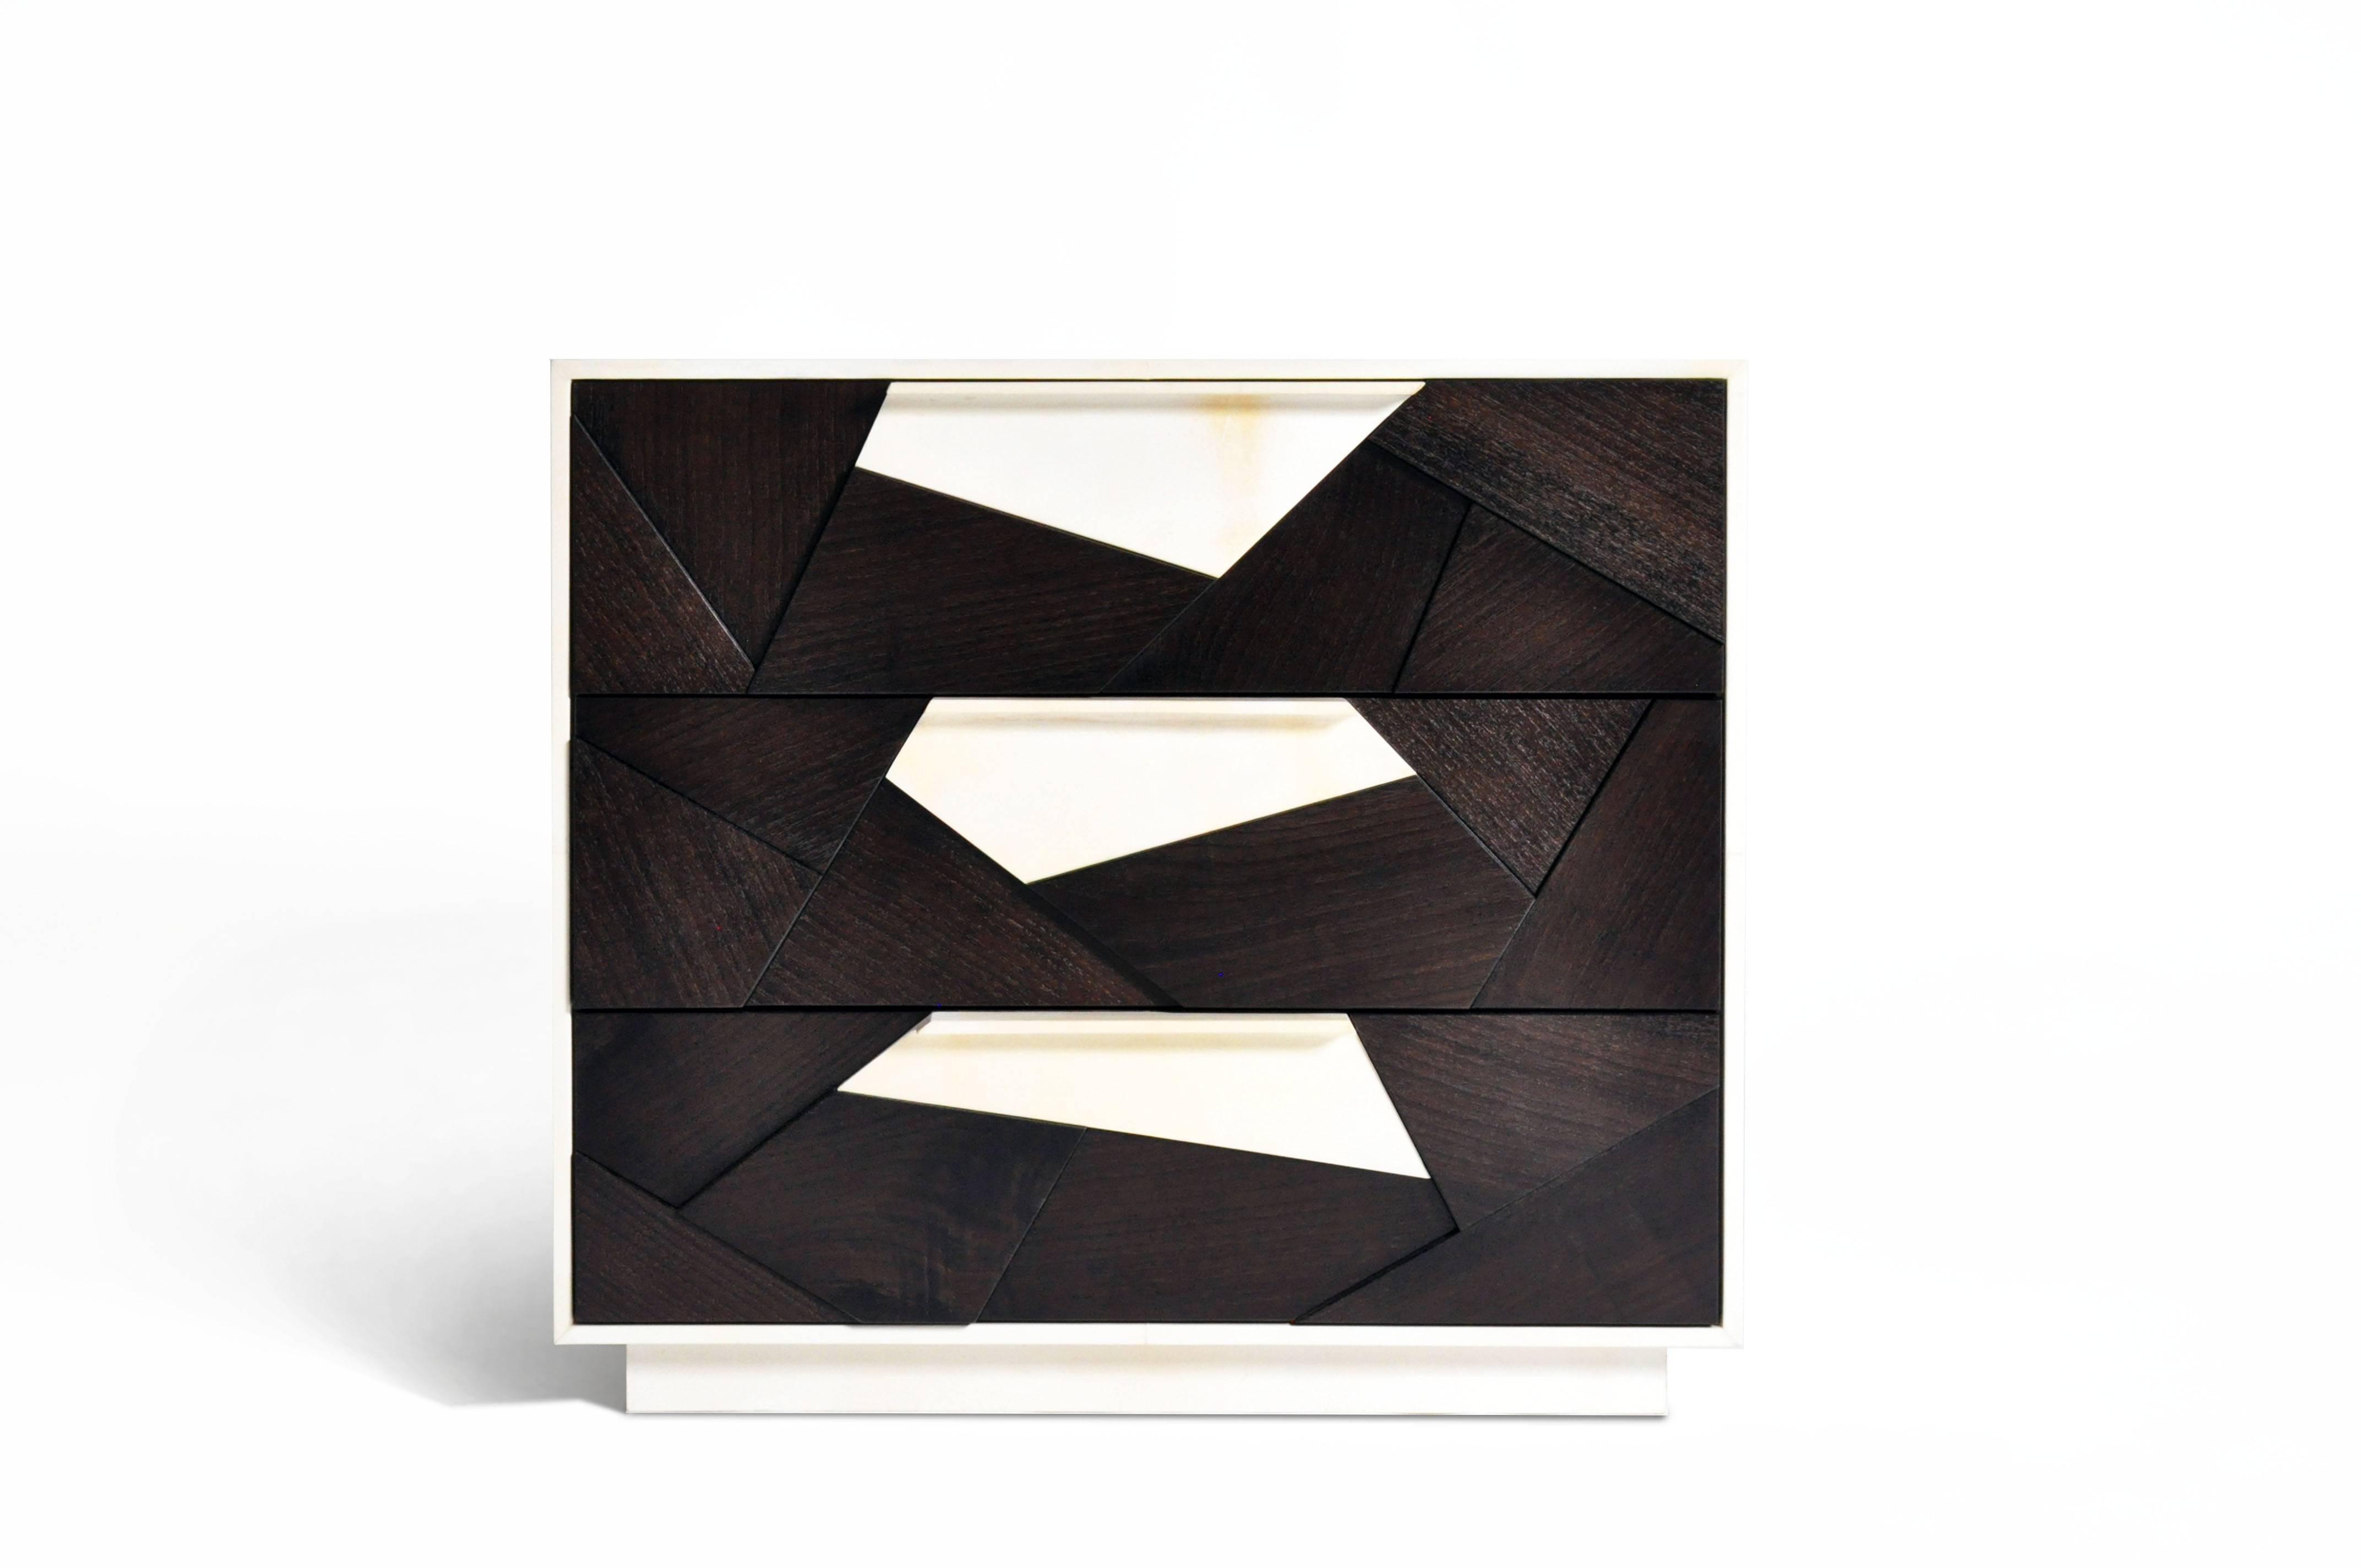 The Cubist nightstand in ebonized American walnut and parchment with a matt polish finish is a stunning artistic nod to modern and contemporary craft and design. The Cubist collection demonstrates the use of geometric shapes perfectly positioned at